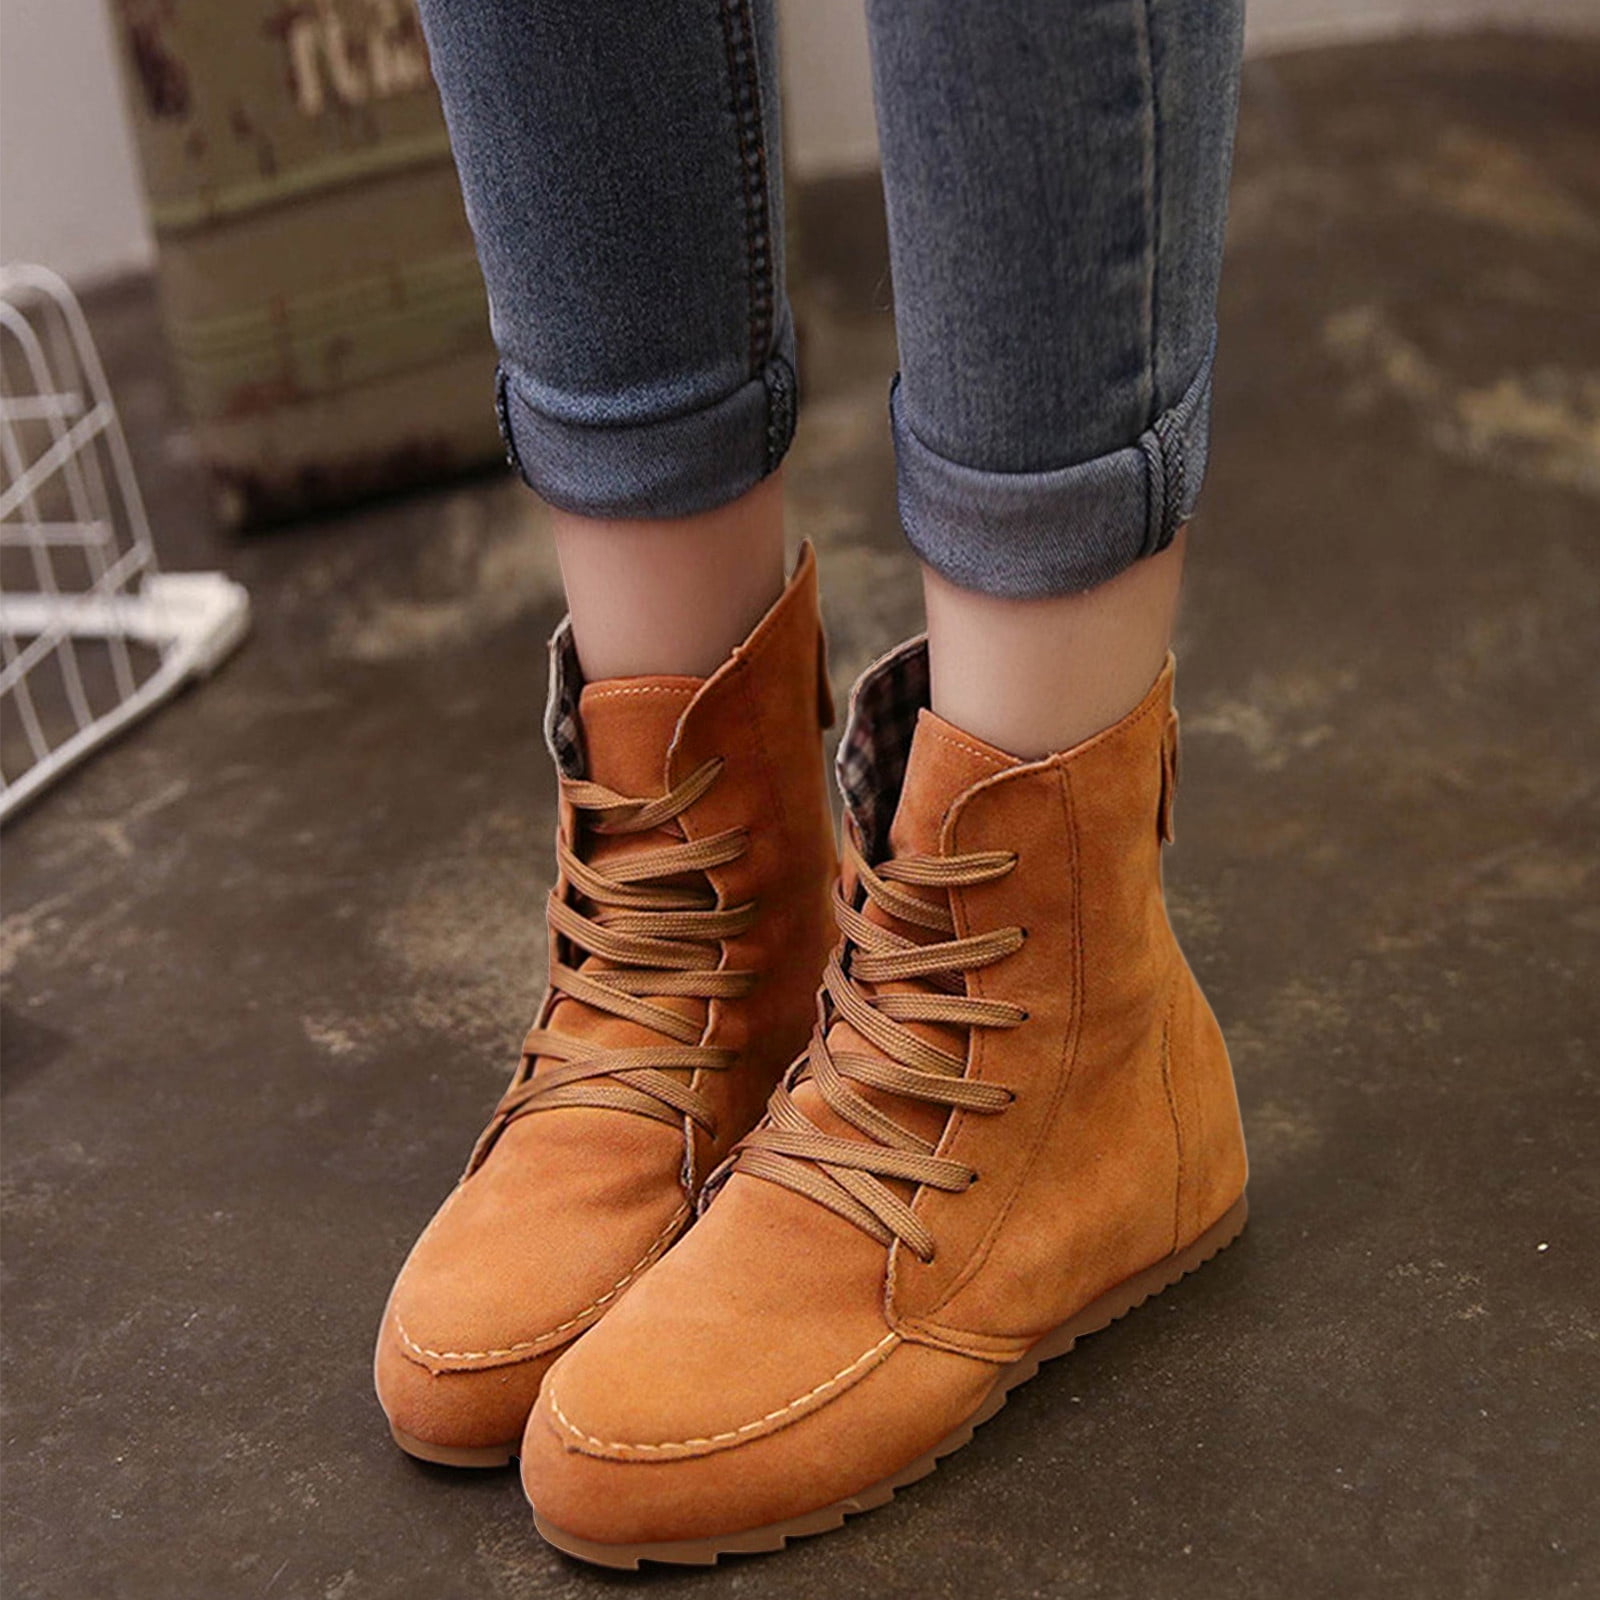 Fashion Women's Lace Up Round Toe Lace Up Suede Leather Motorcycle Ankle Boots 